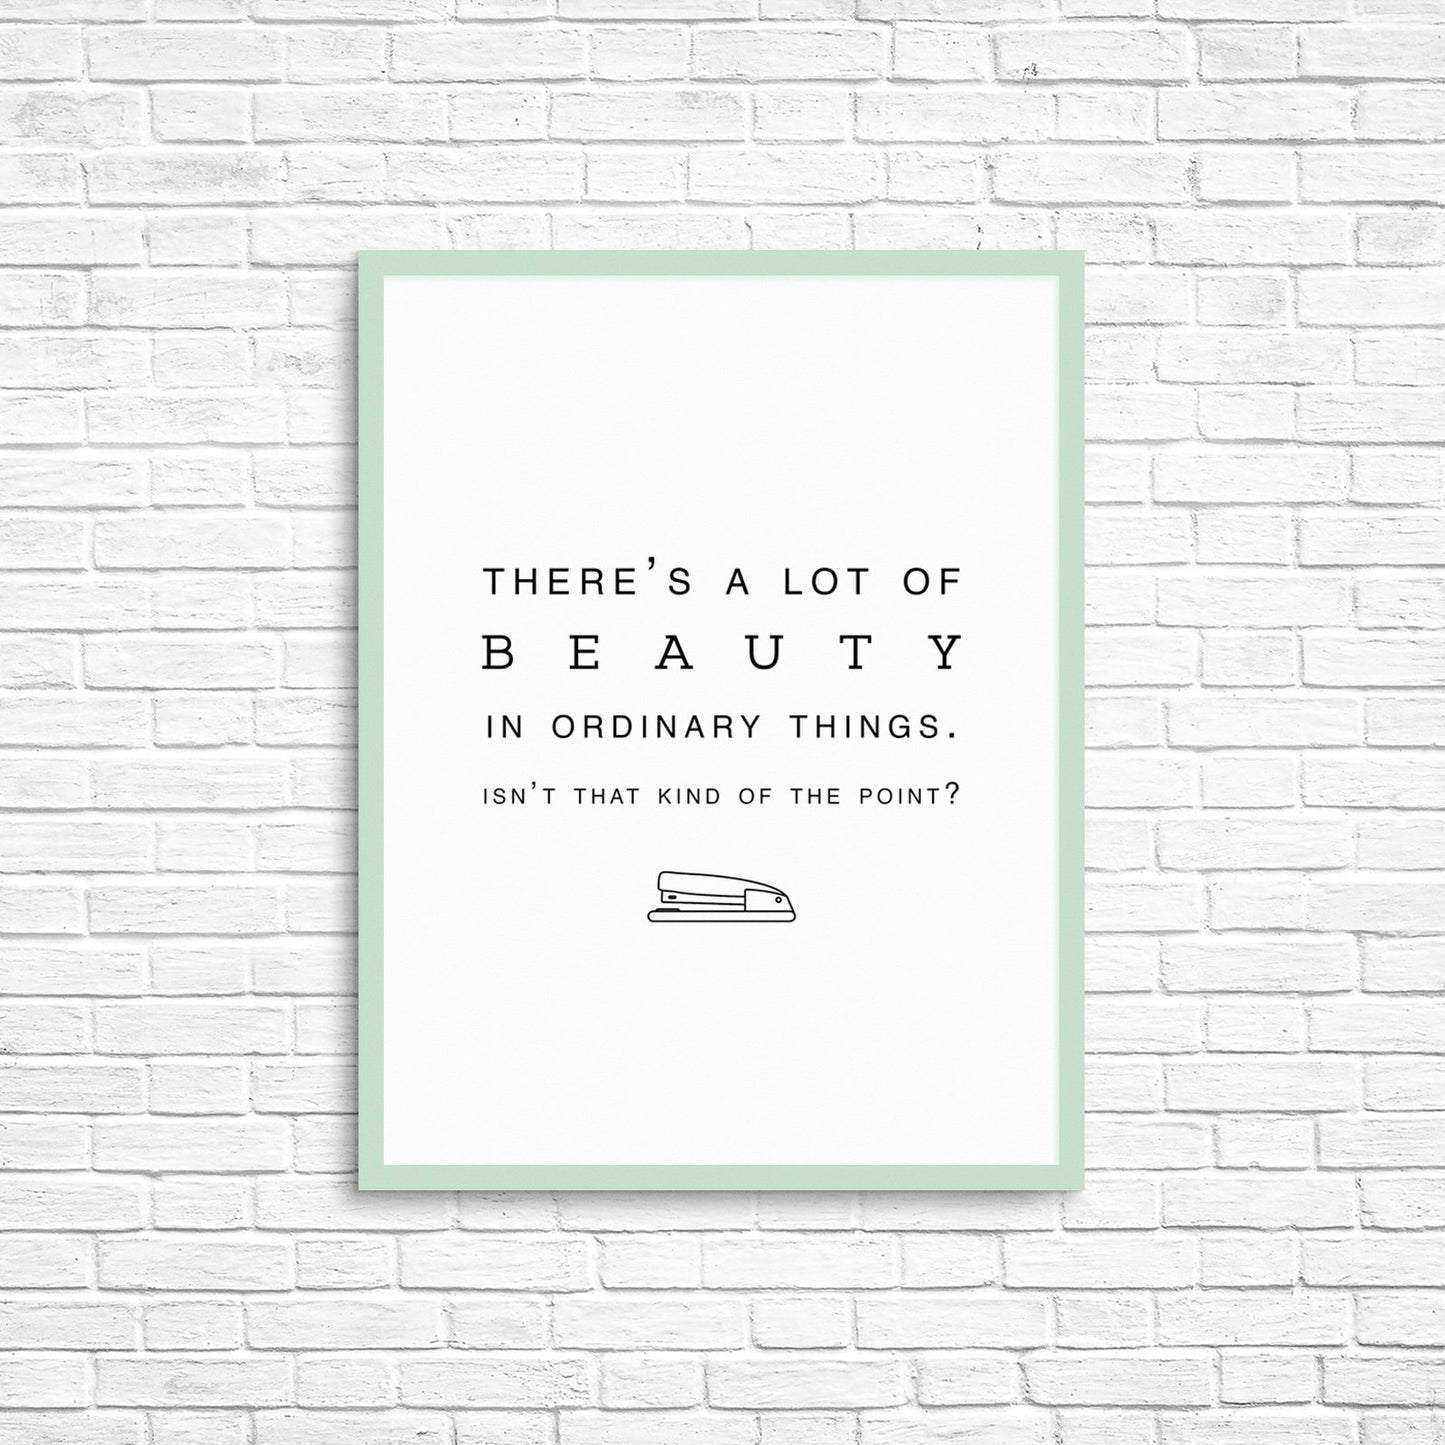 ART PRINT "There's a lot of beauty in ordinary things. Isn't that kind of the point?" - Pam Halpert, The Office